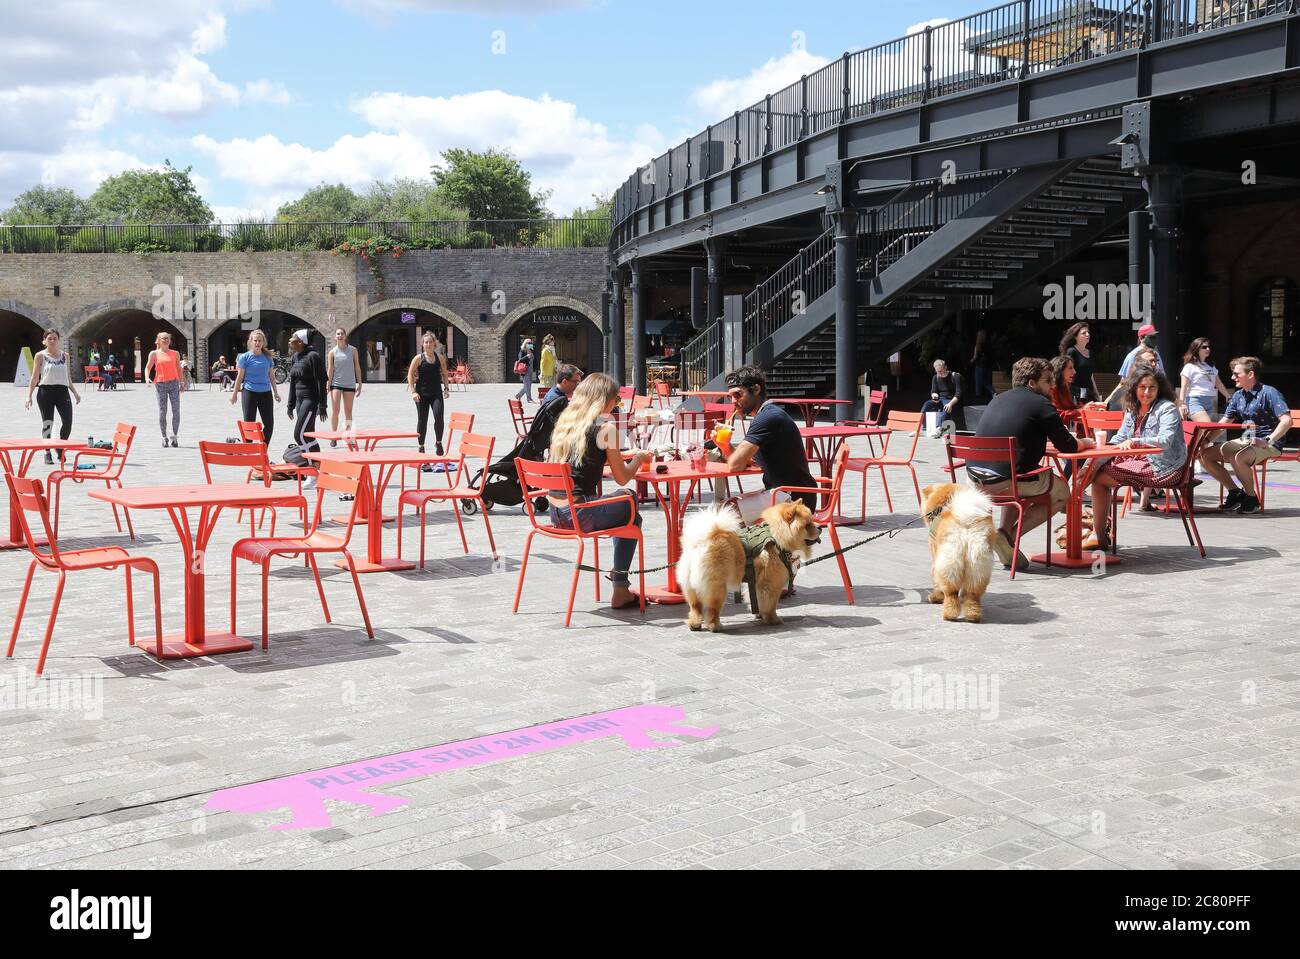 Outdoor seating in the summer sunshine in post corona times at CDY, at Kings Cross, London, UK Stock Photo